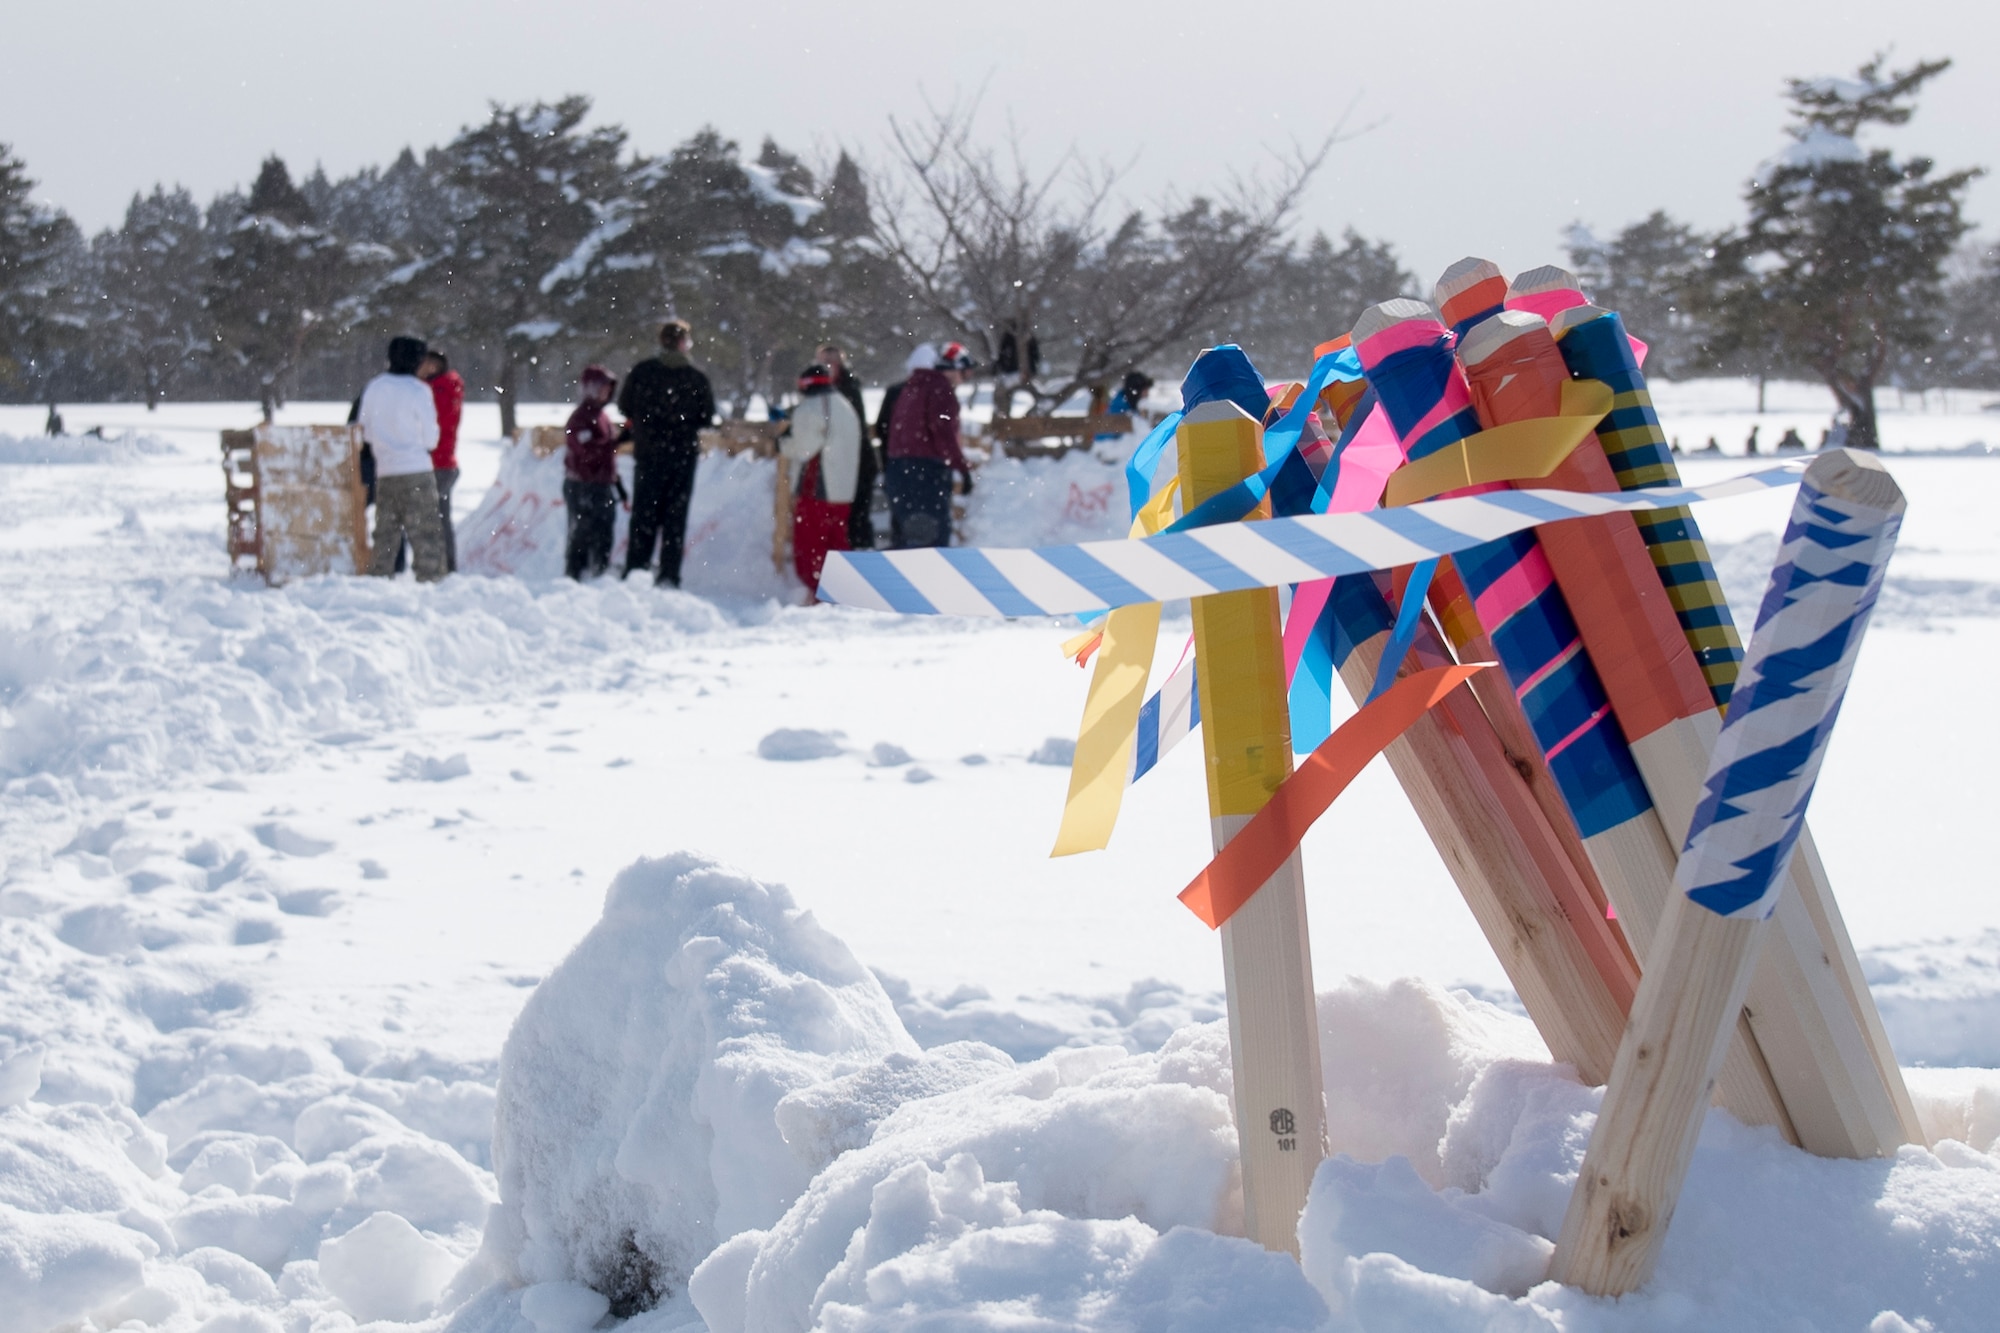 The flags get planted in the snow to represent the 35th Civil Engineer Squadron flights who participated in the inaugural “Snowblast” event at Misawa Air Base, Japan, Feb. 14, 2019. Members of each flight attempted to capture the opponent’s flag rested from fortress. The event ended in a three-way tie between infrastructure, explosive ordnance disposal, and the Japan Air Self-Defense teams. (U.S. Air Force photo by 1st Lt. Jeremy Garcia)